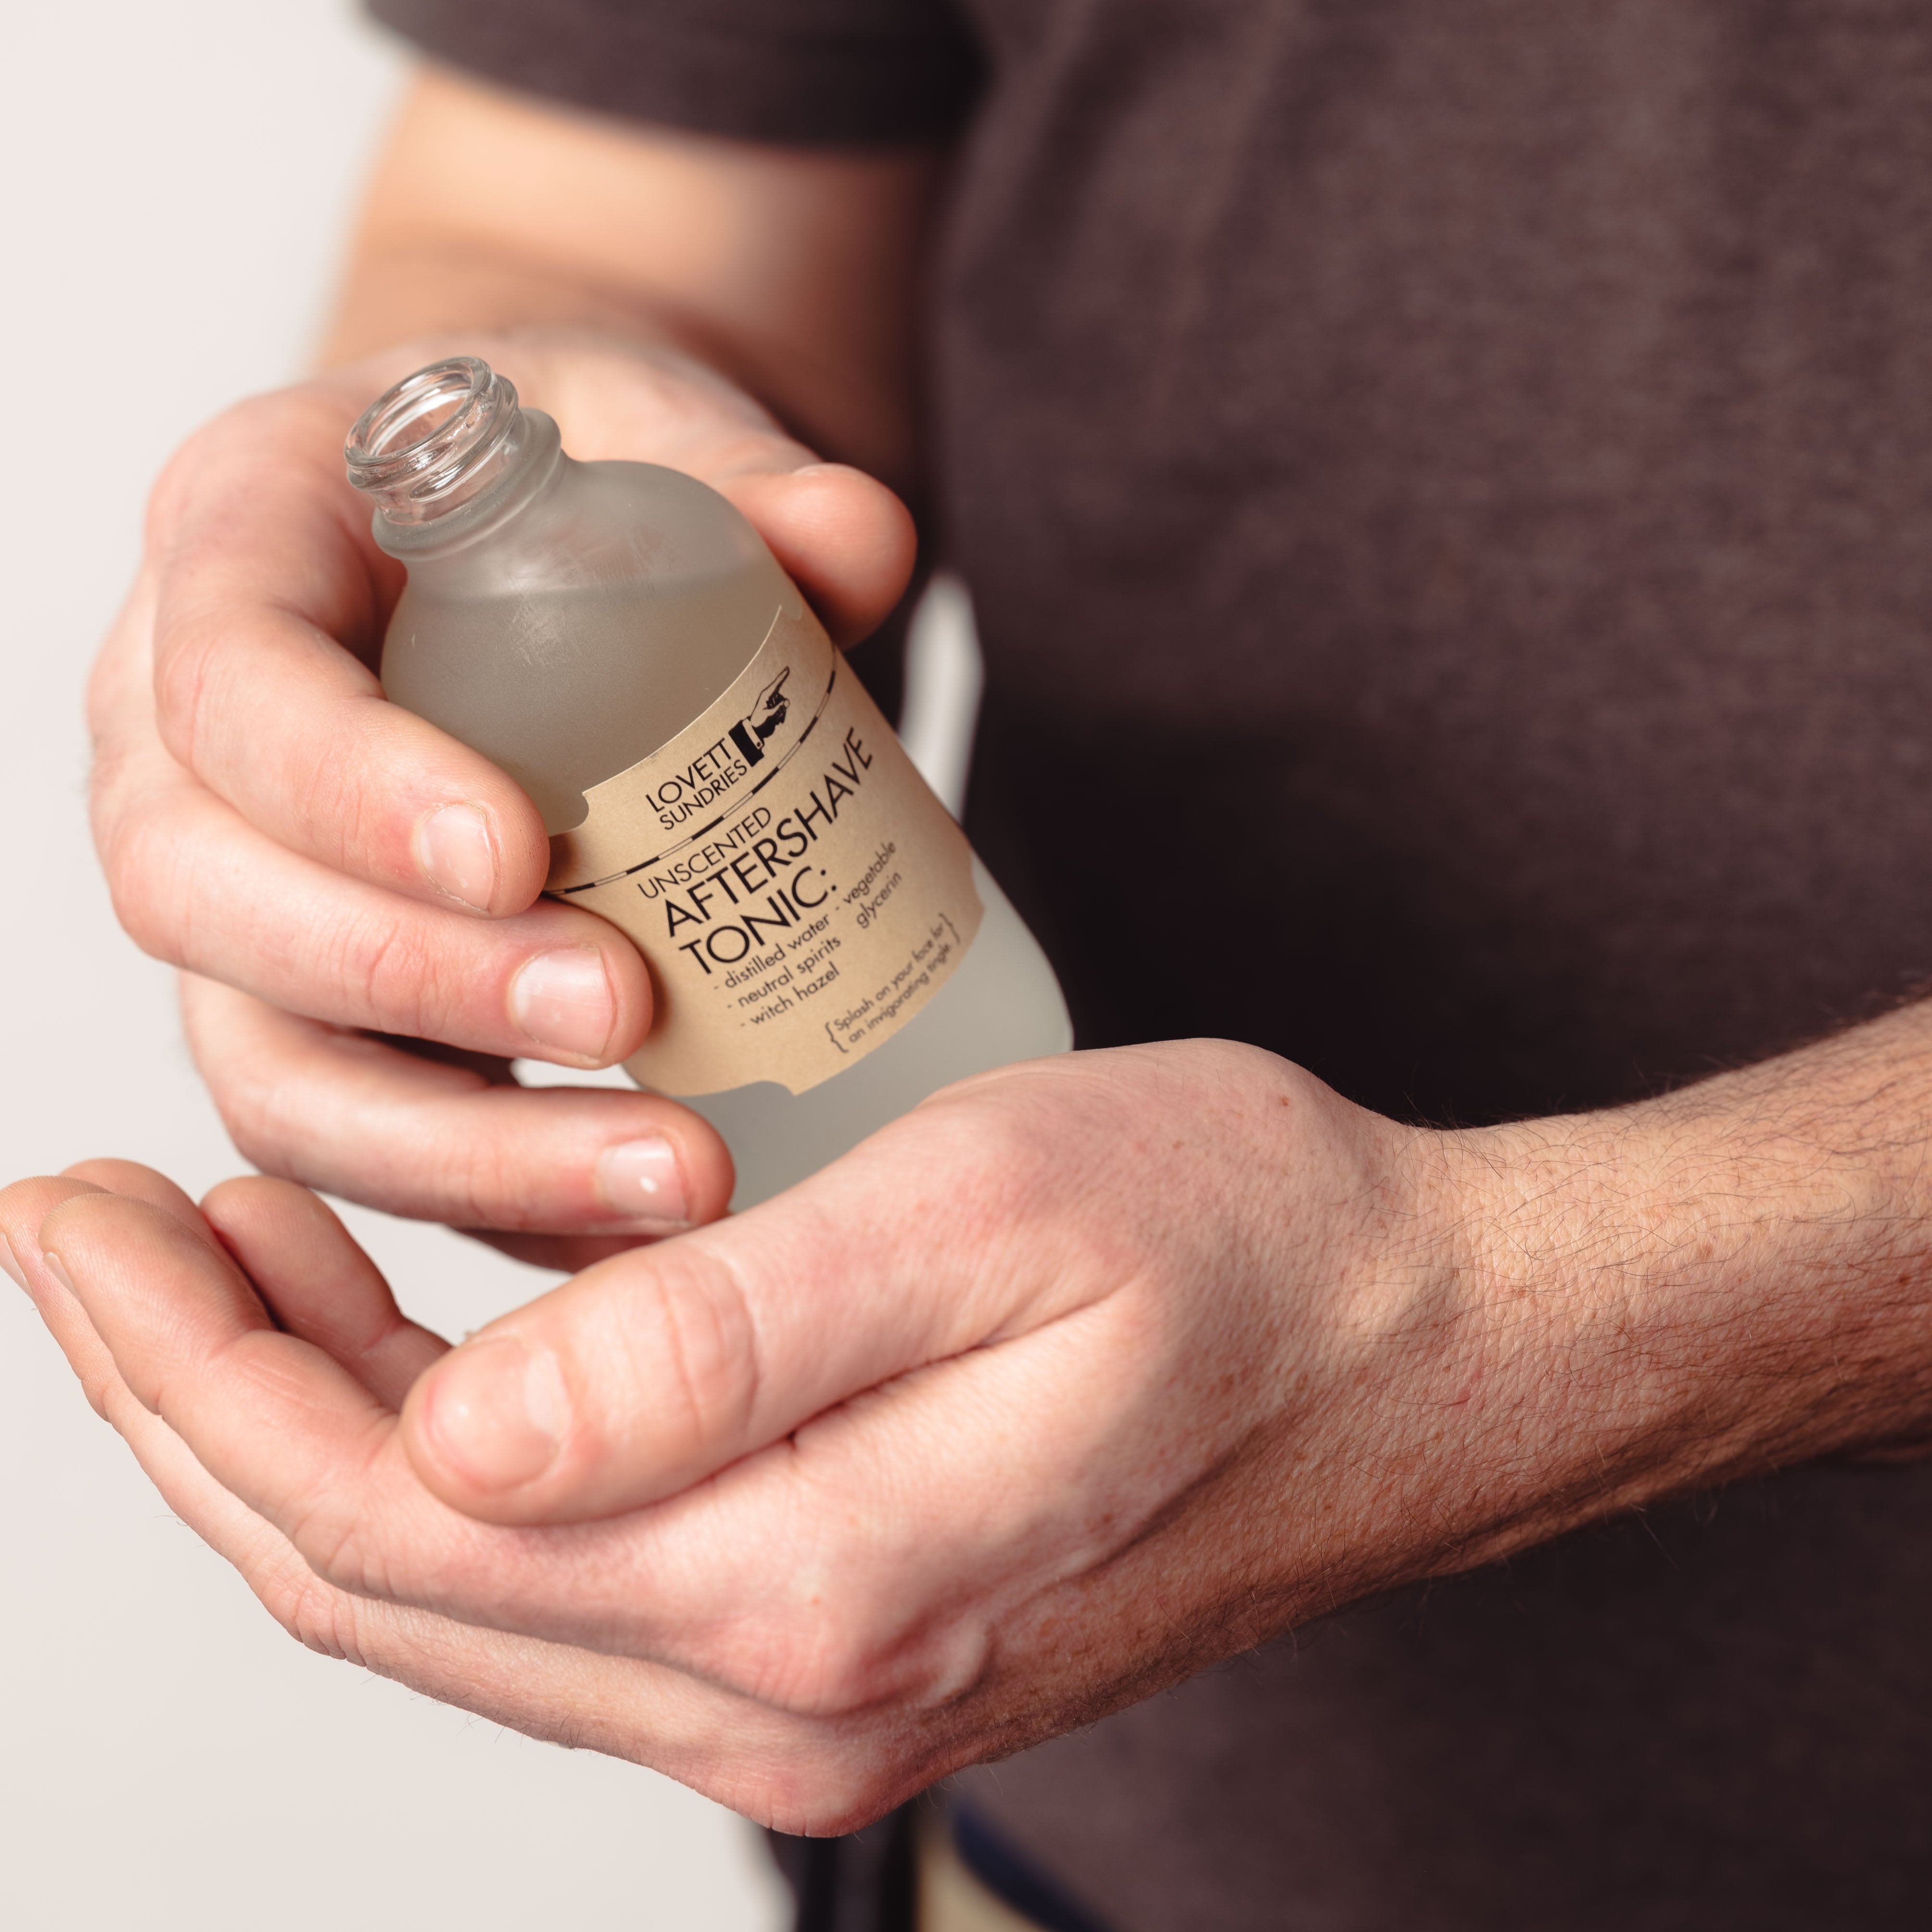 A person holding a bottle of aftershave tonic.